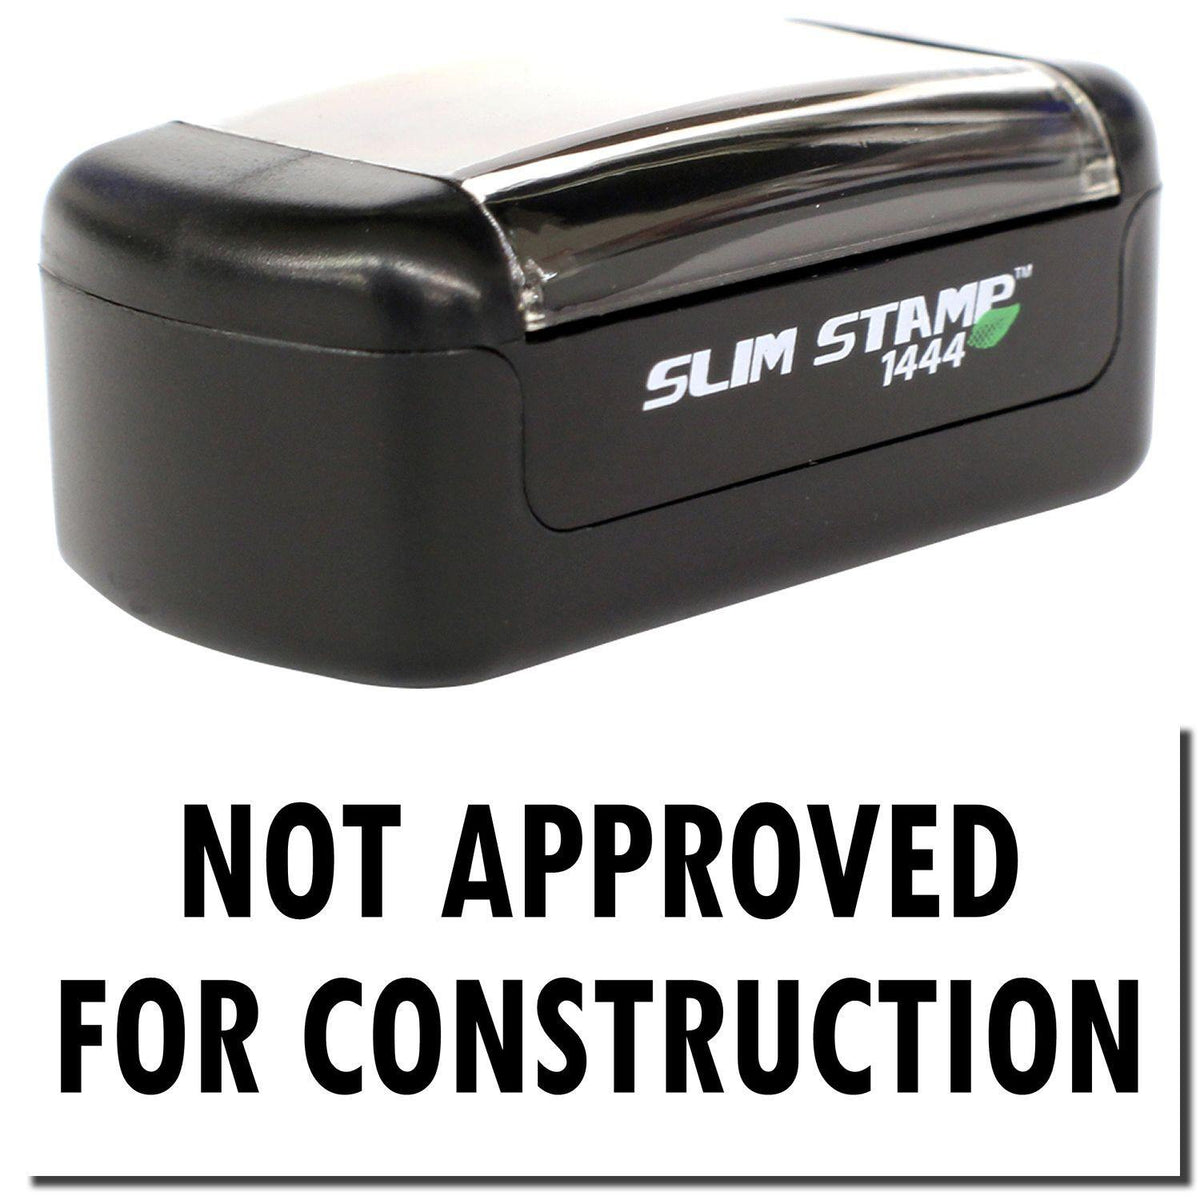 A stock office pre-inked stamp with a stamped image showing how the text &quot;NOT APPROVED FOR CONSTRUCTION&quot; is displayed after stamping.